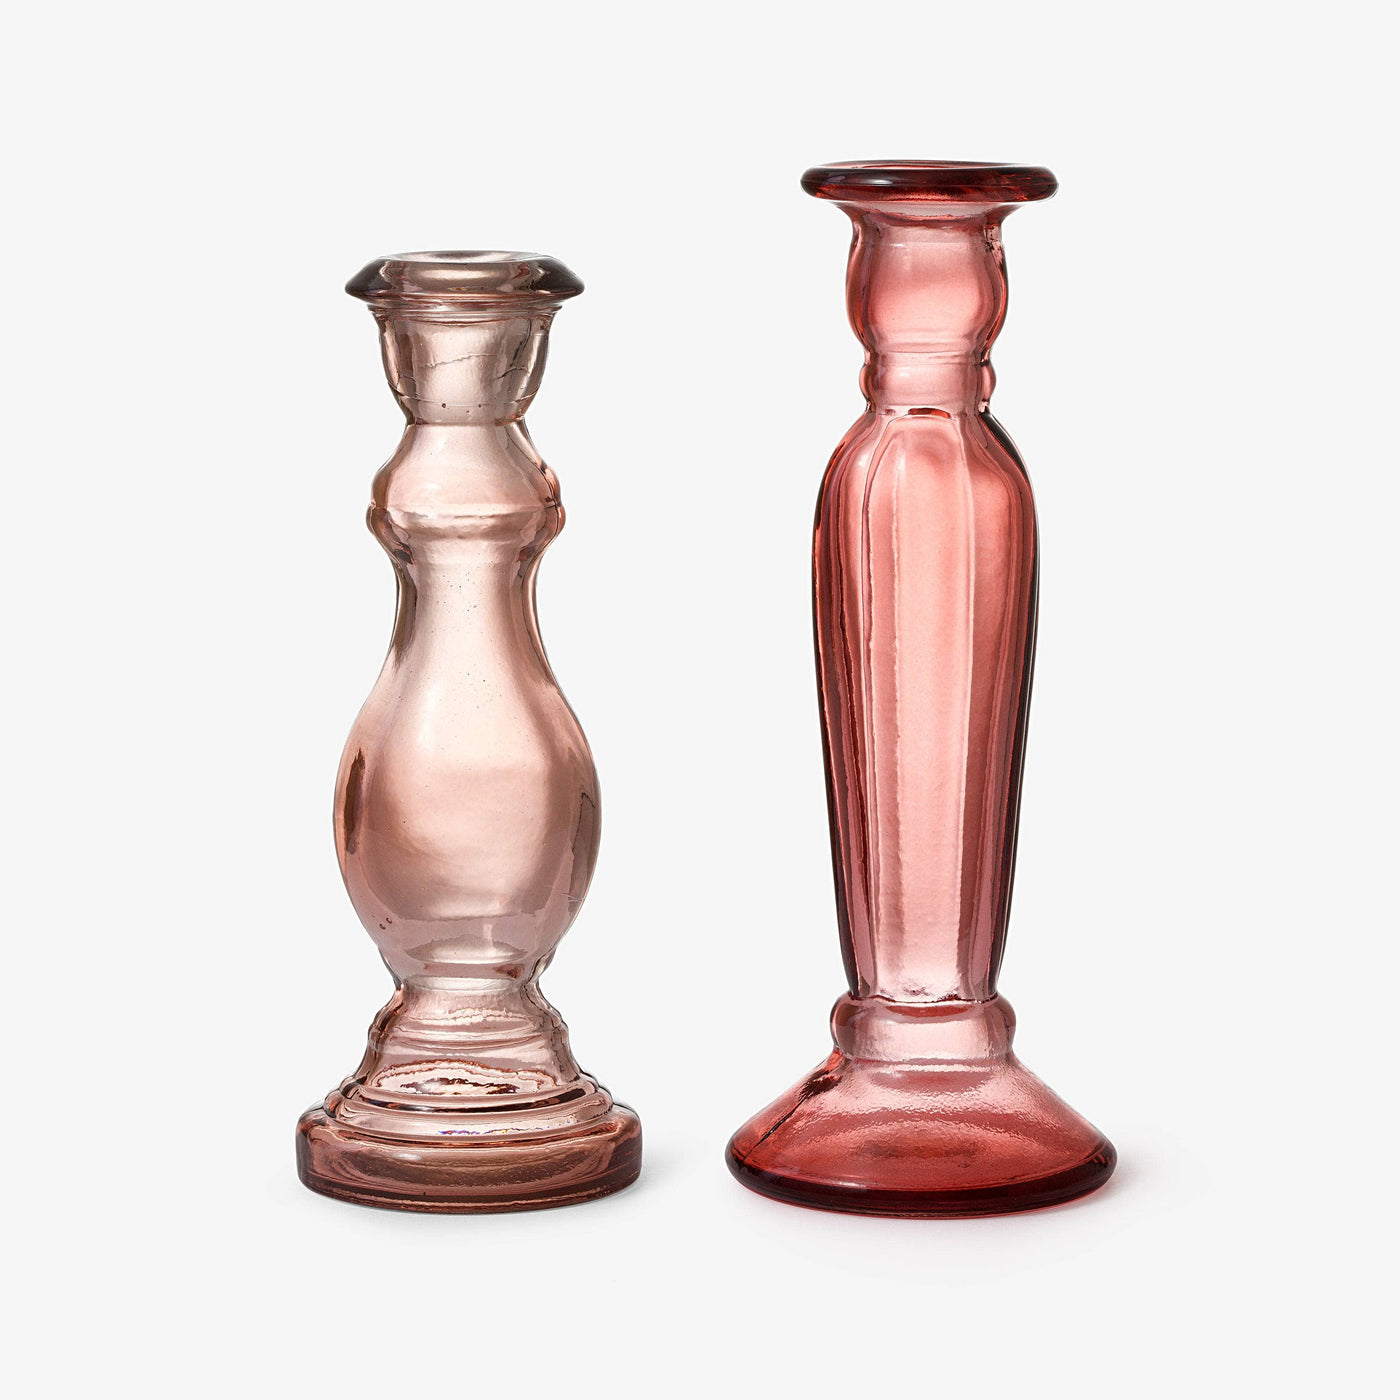 Lumie Glass Candlestick, Pink, 20 cm Candle Holders sazy.com